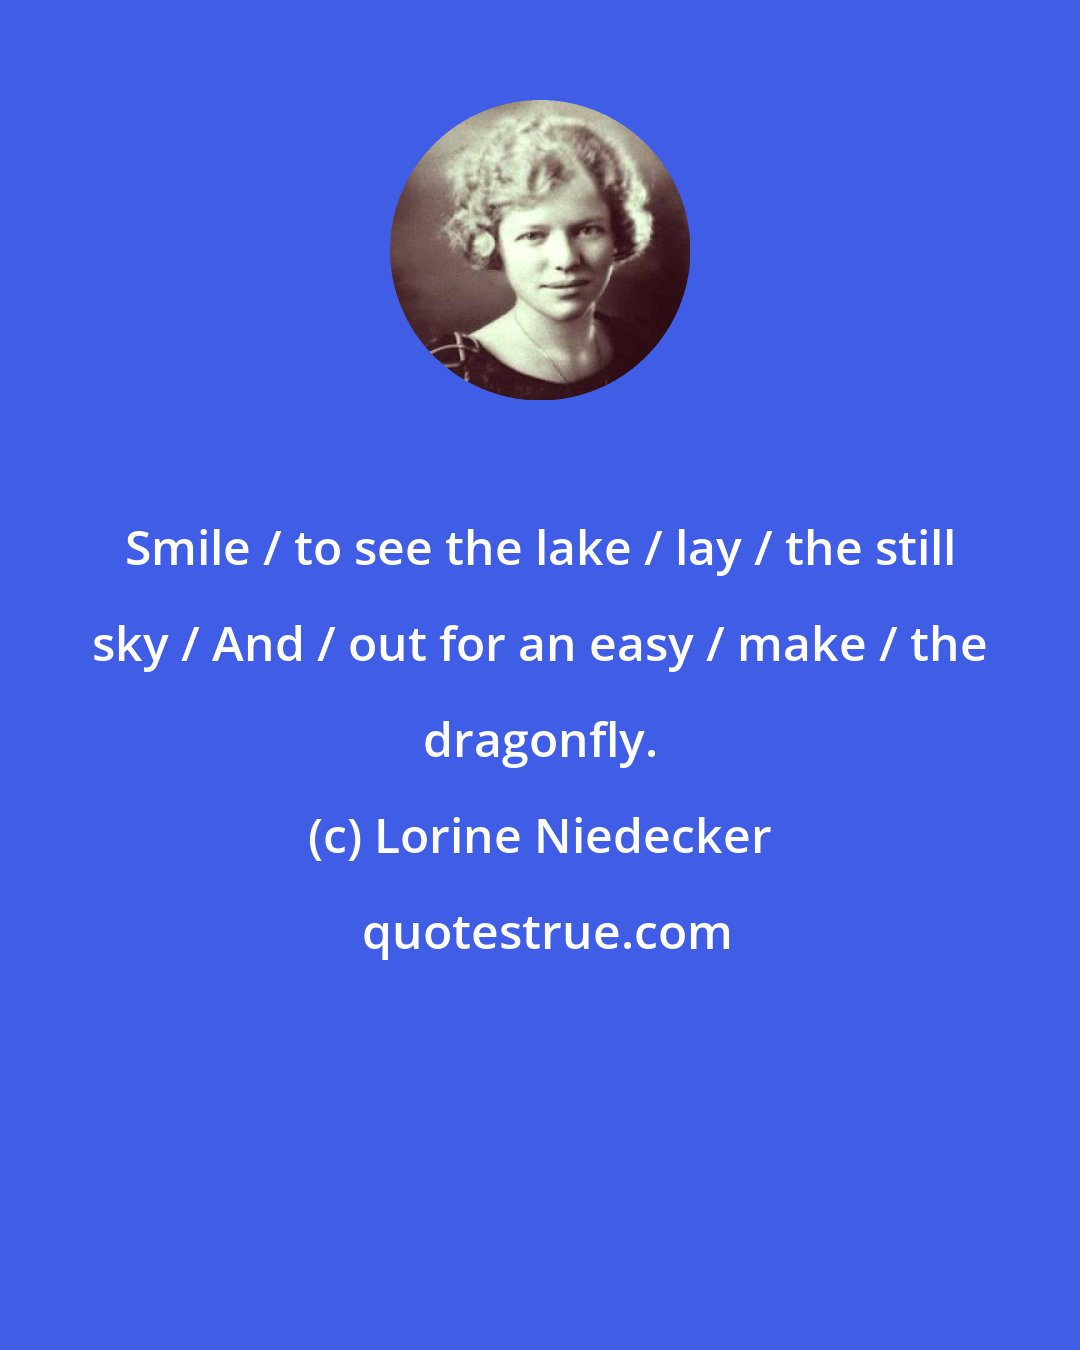 Lorine Niedecker: Smile / to see the lake / lay / the still sky / And / out for an easy / make / the dragonfly.